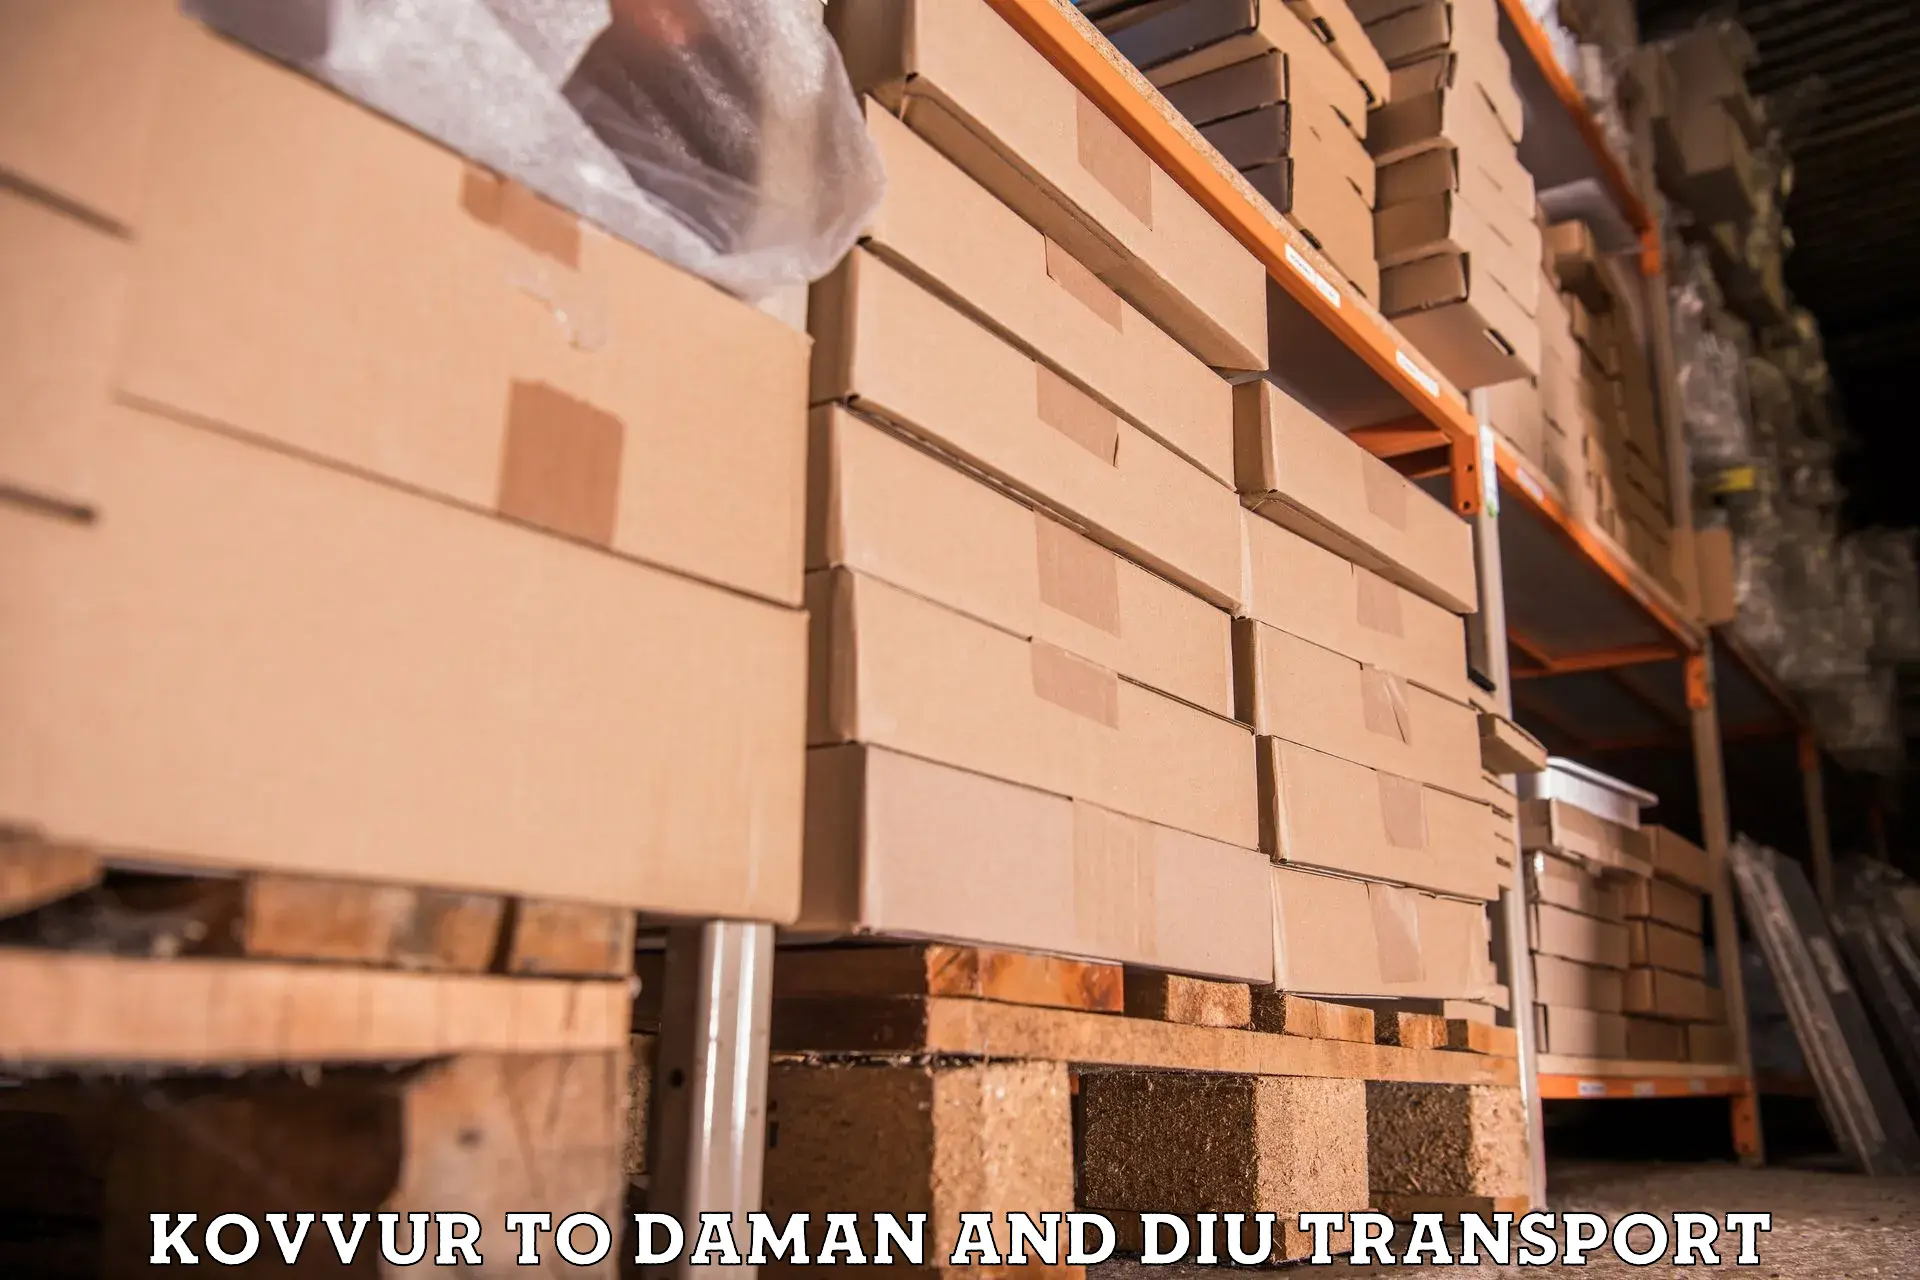 Container transport service Kovvur to Diu